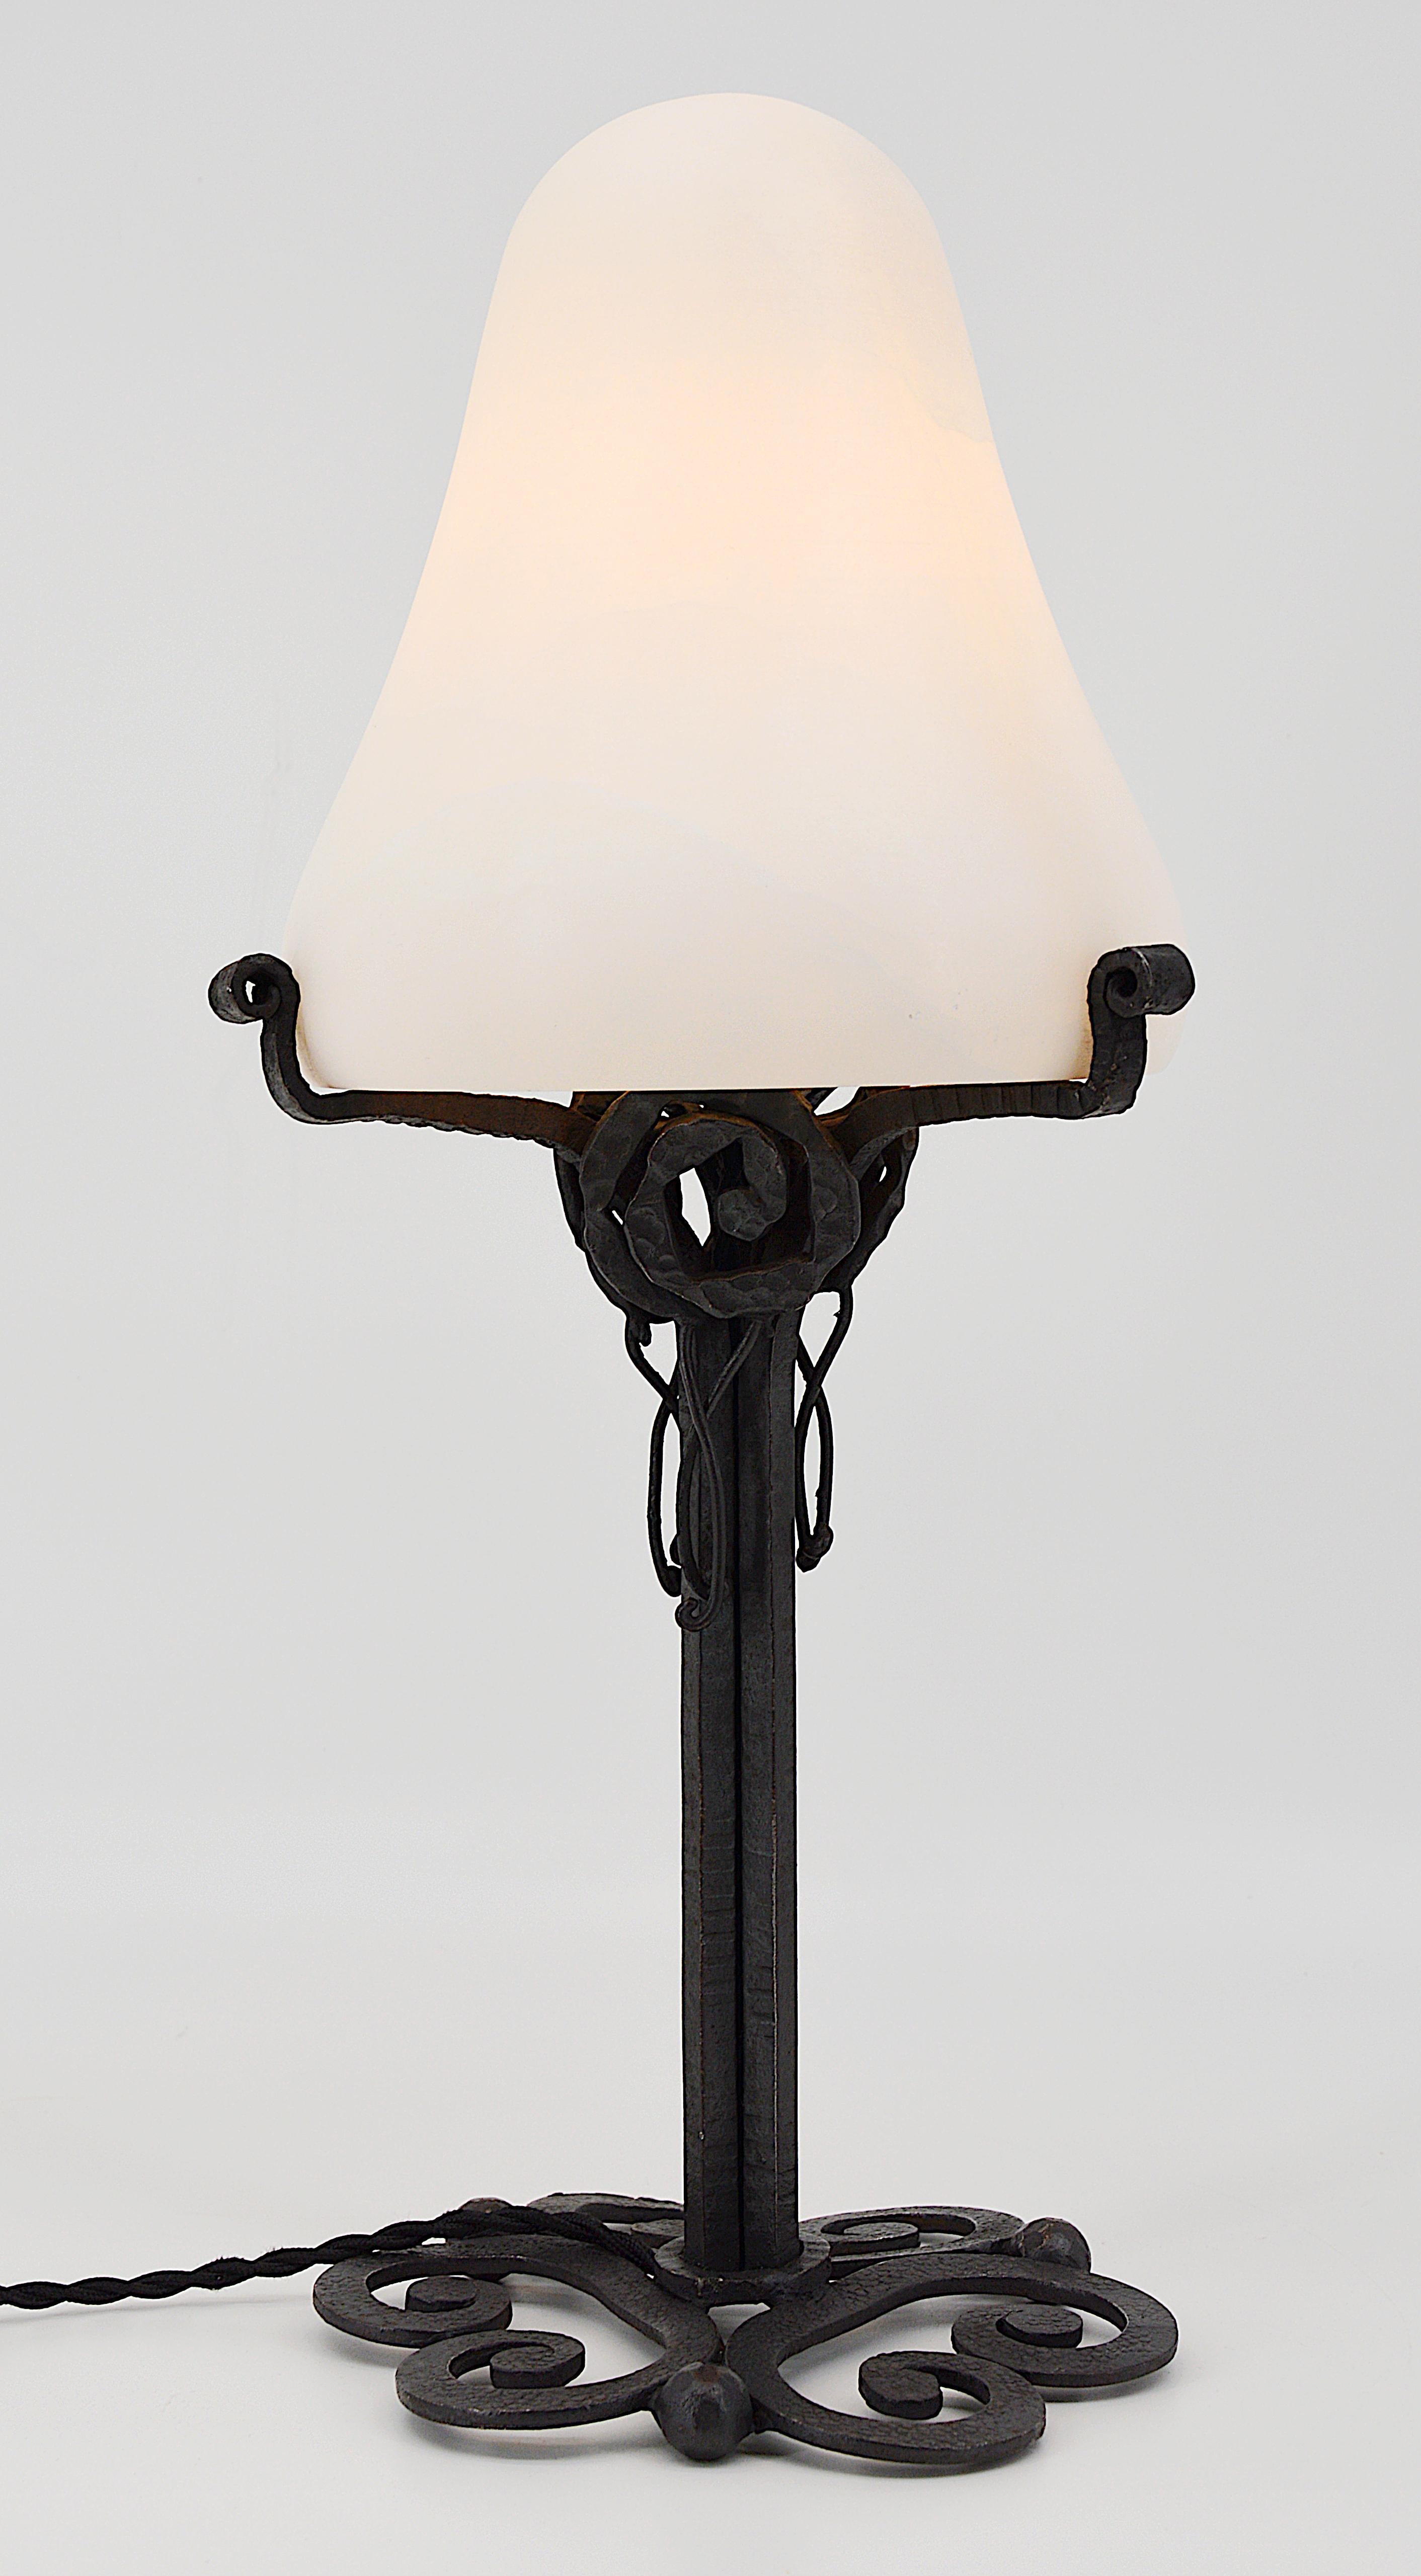 French Art Deco table lamp, France, circa 1925. Thick alabaster shade on its stunning wrought iron base. Close to Edgar Brandt's works. Old alabaster cannot be compared to new ones. Old alabaster has veins. Sometimes they can be mistaken for cracks.